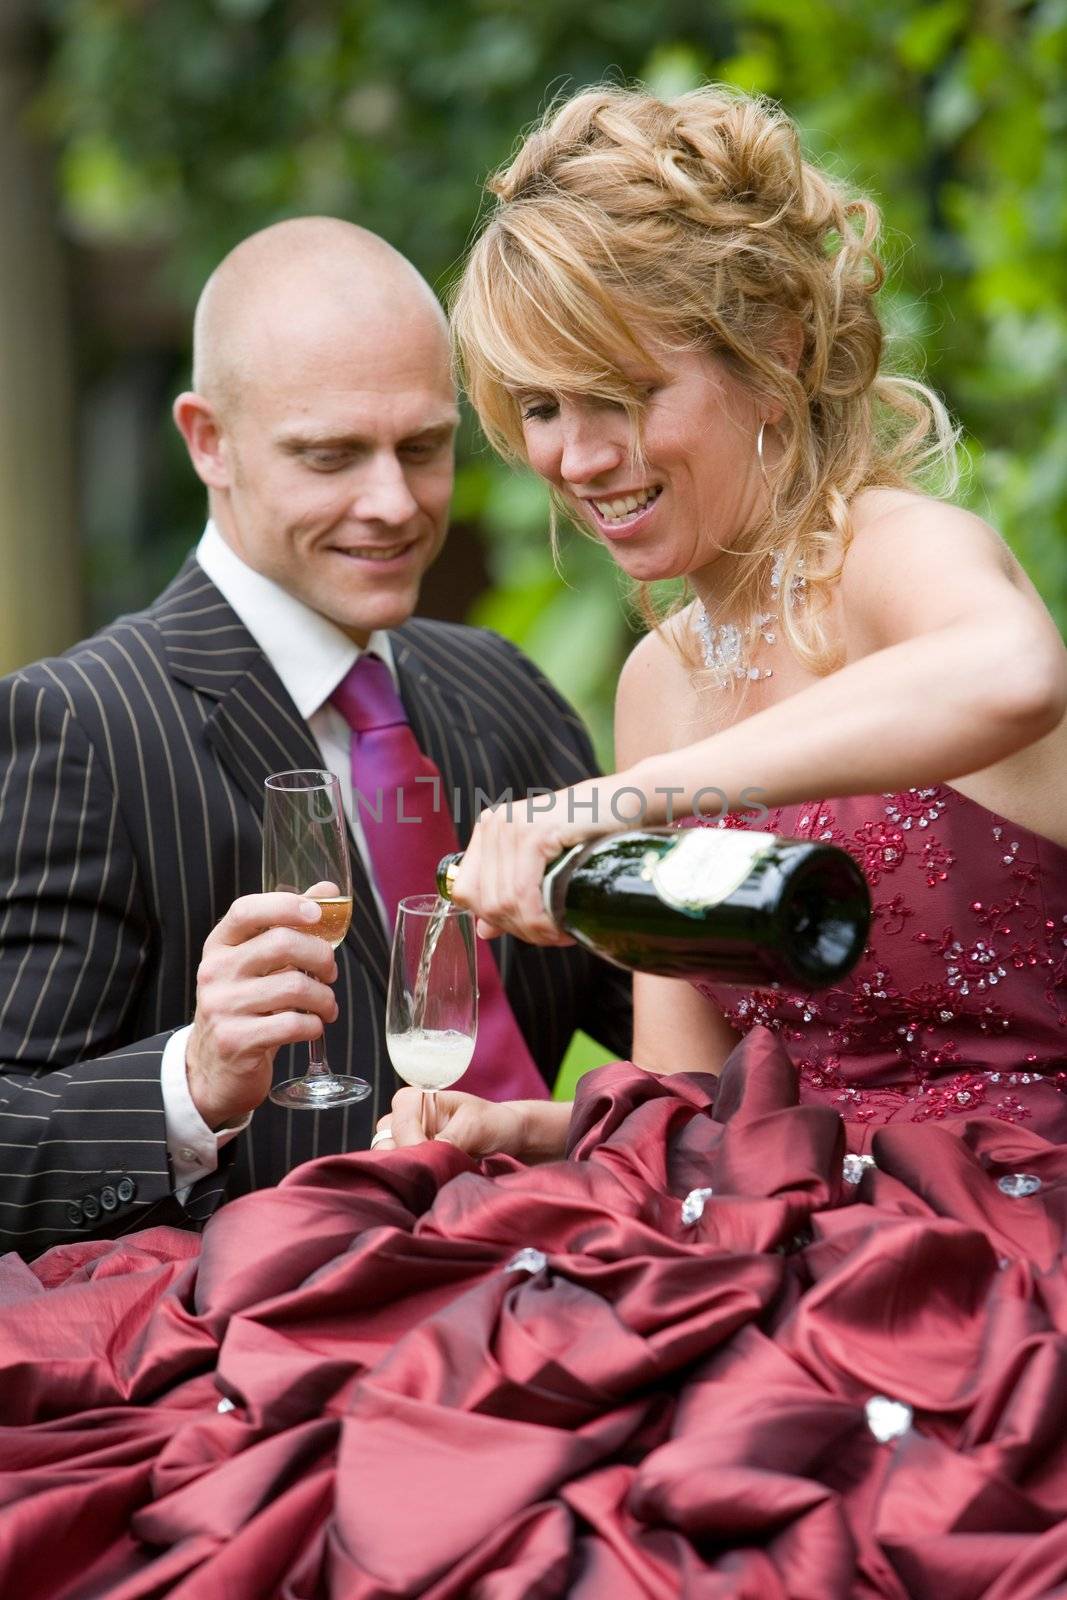 Beautiful newly wed couple having a drink outdoors with a bottle of champagne and glasses (shallow dof, focus on bride)